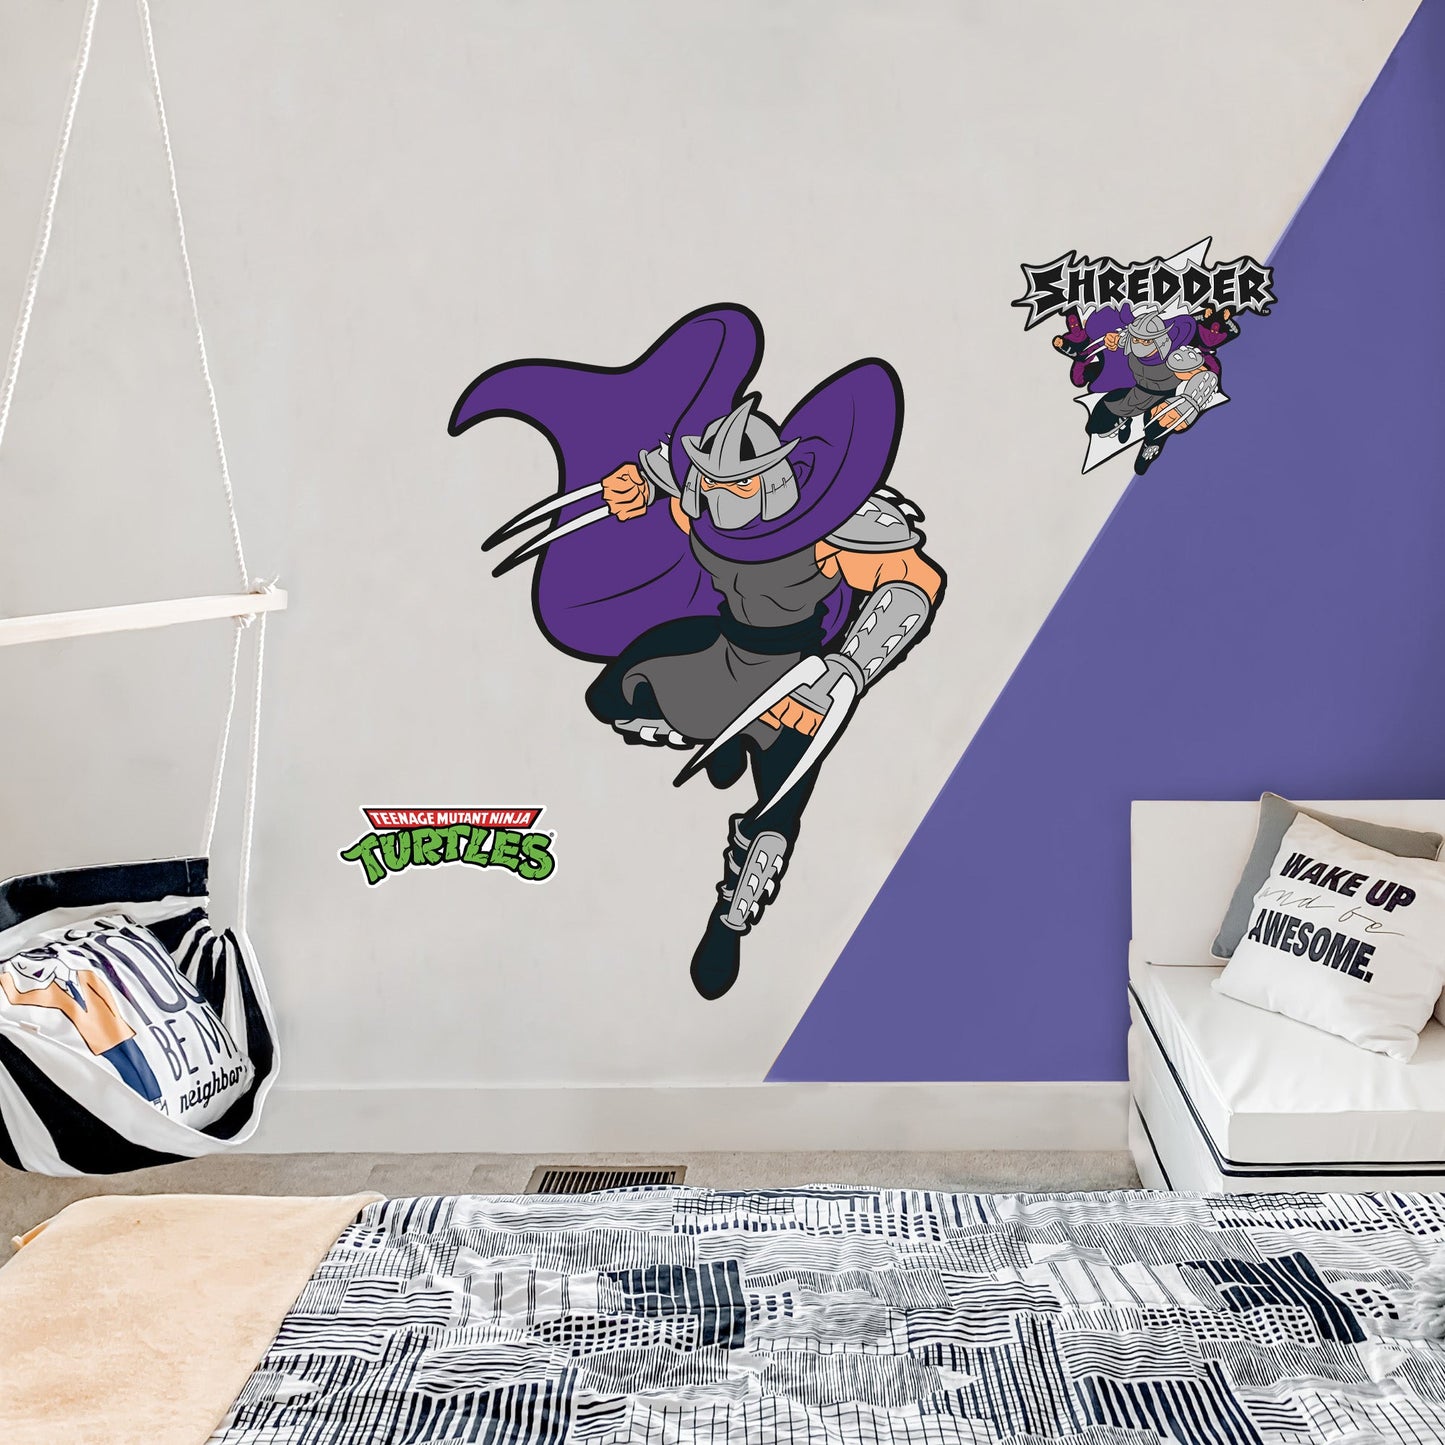 Teenage Mutant Ninja Turtles: Shredder Classic RealBig - Officially Licensed Nickelodeon Removable Adhesive Decal